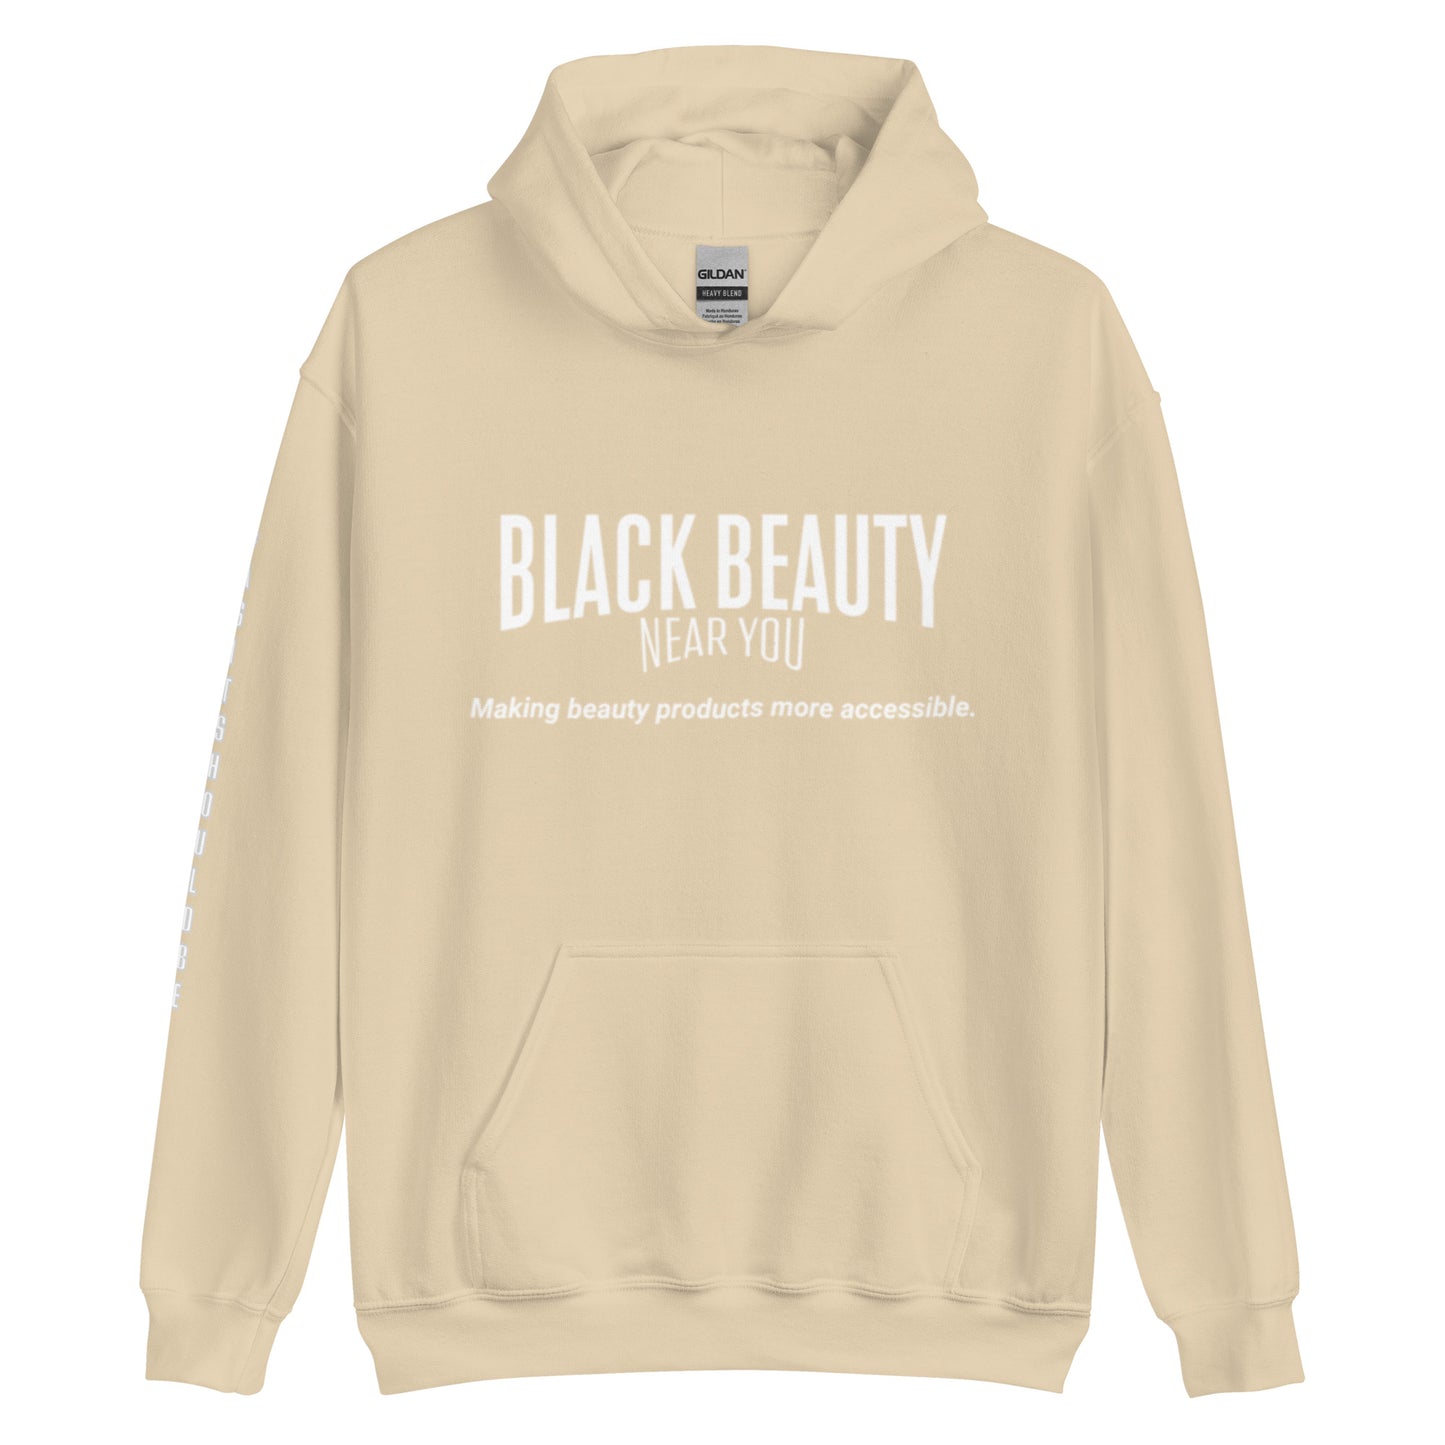 BBNY Unisex Hoodie - COLORS - #ASITSHOULDBE on Right Sleeve [White Logo Color]